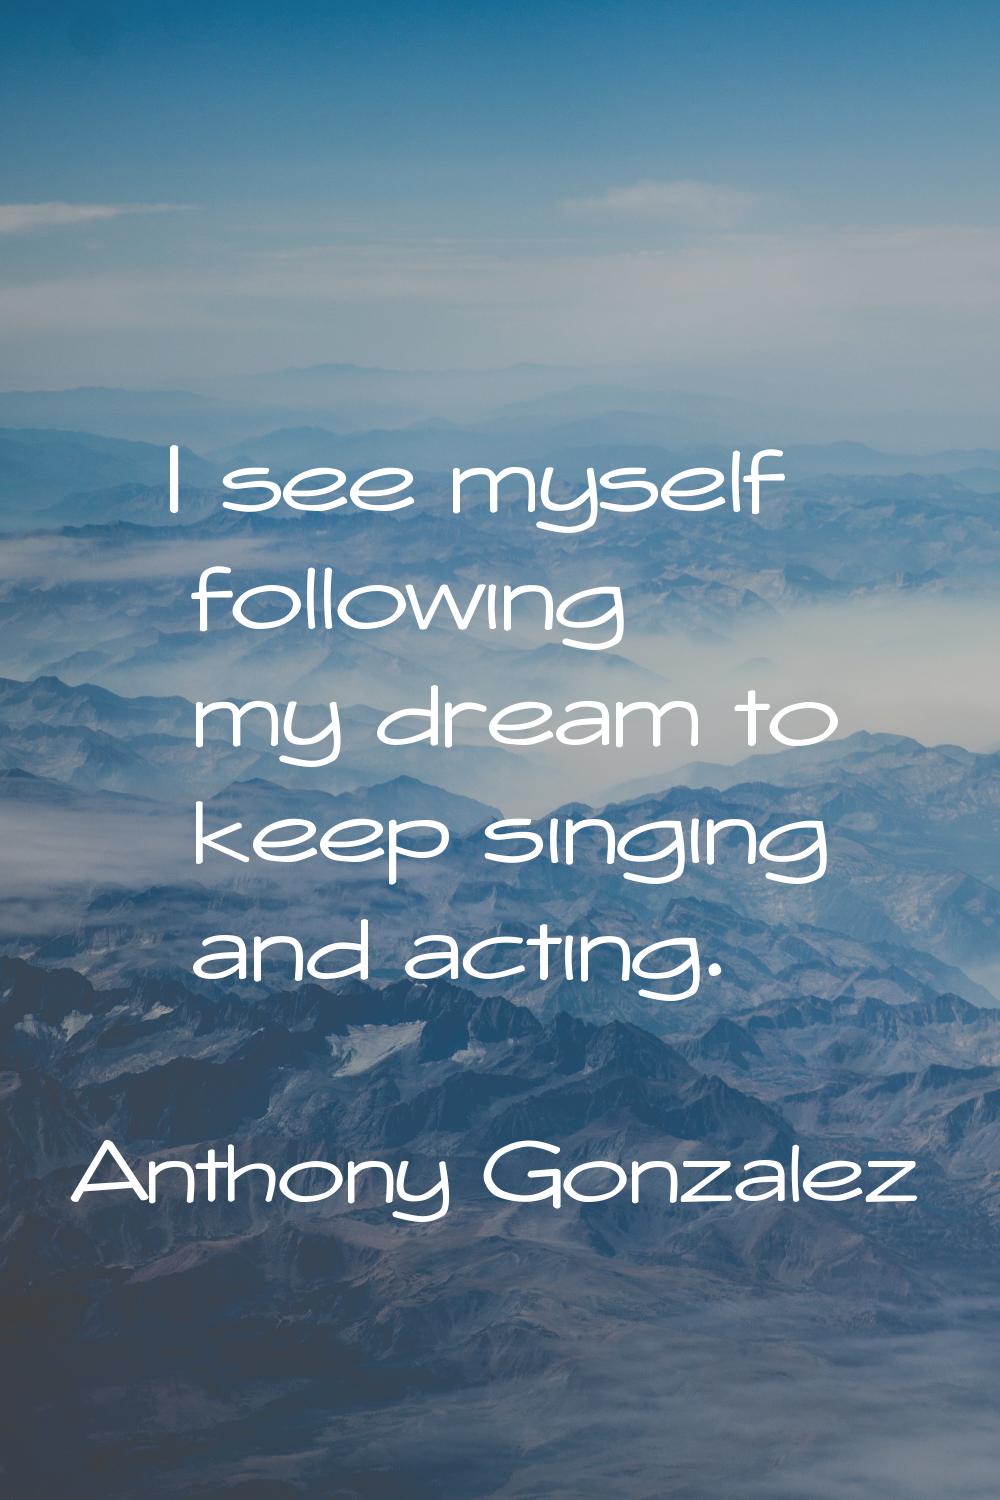 I see myself following my dream to keep singing and acting.